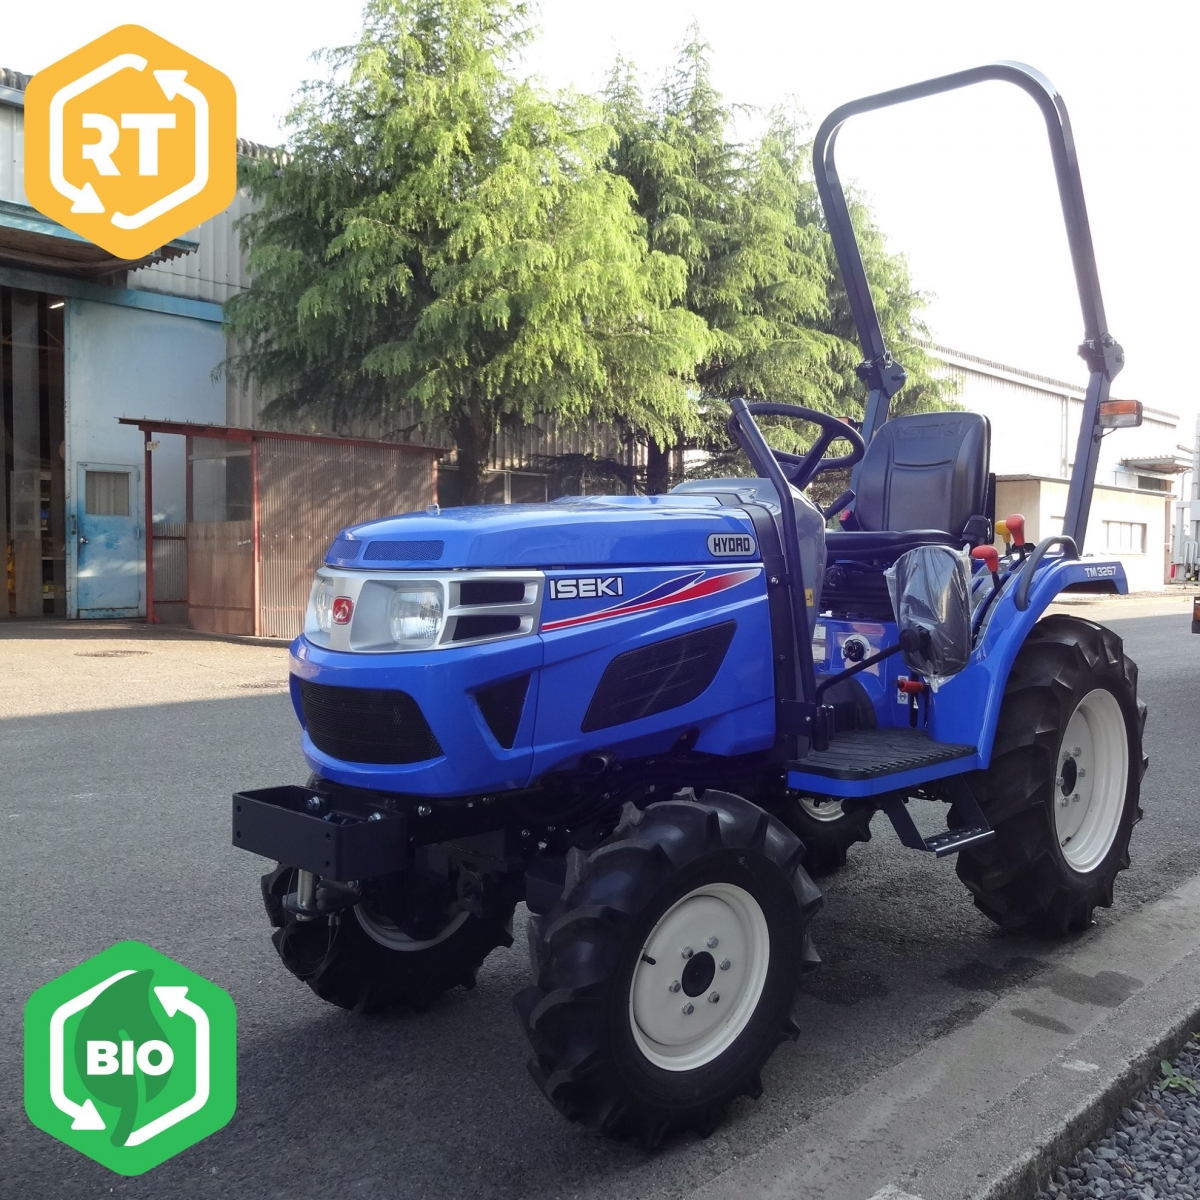 Iseki TM3267 HST Compact Tractor | Available for Hire!